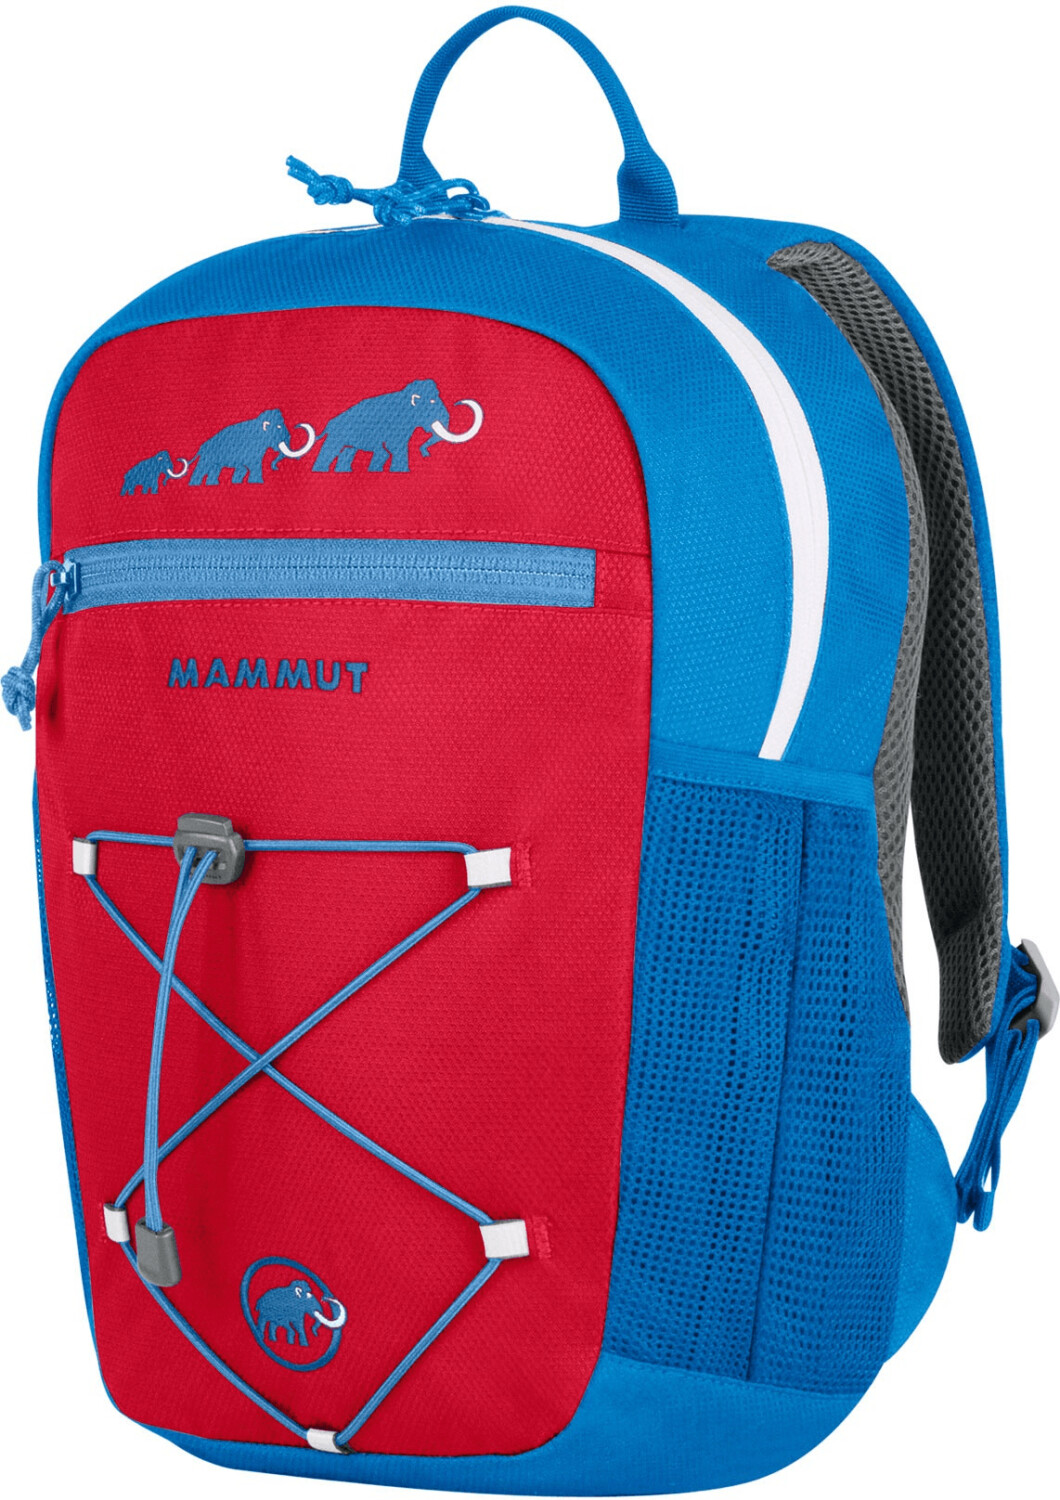 Mammut First Zip 8 imperial/inferno